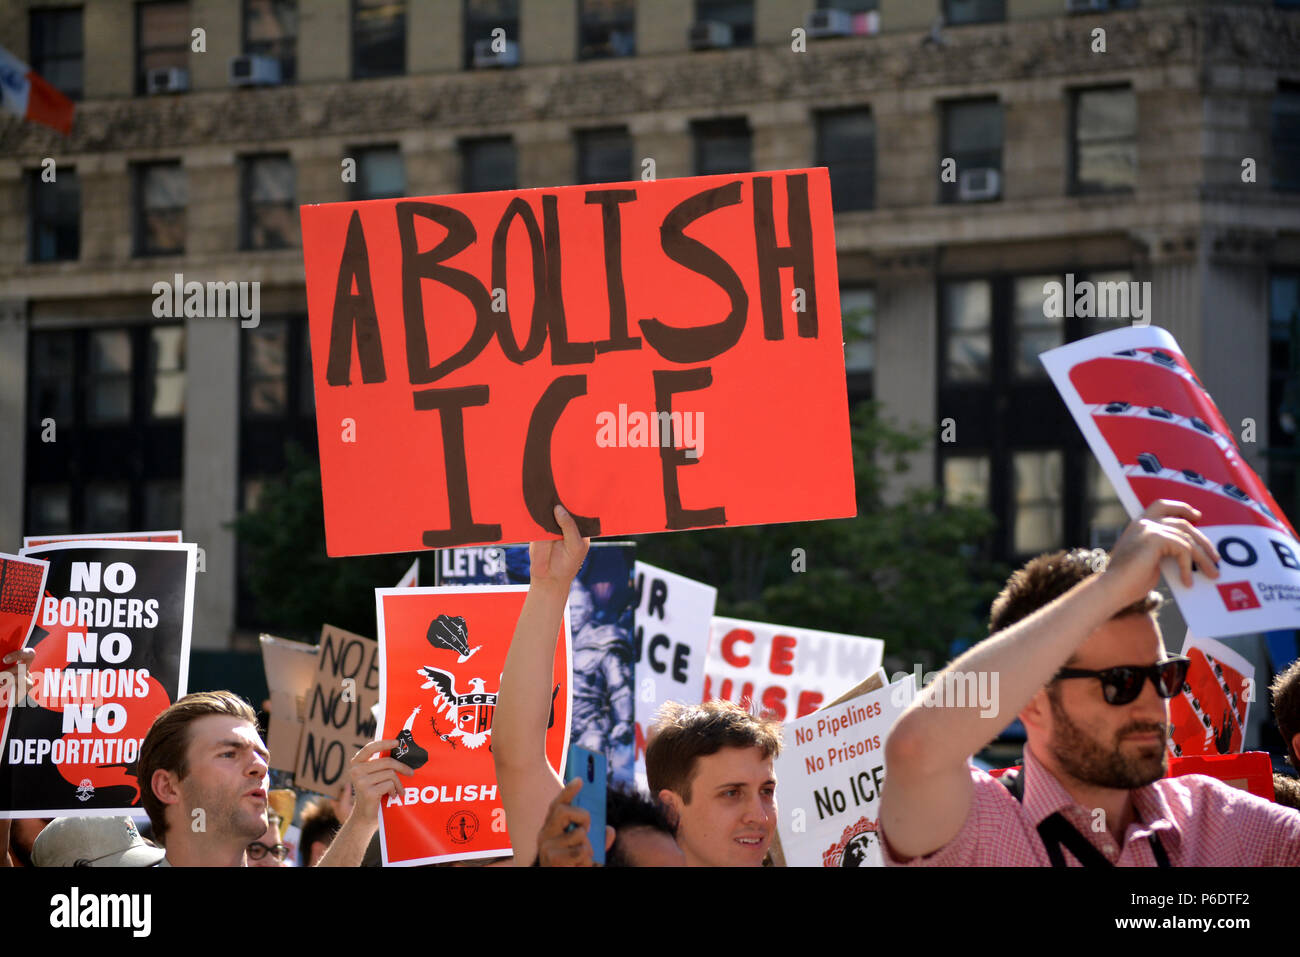 New York, USA, 29 June 2018. People marching to abolish ICE in New York City. Credit: Christopher Penler/Alamy Live News Stock Photo